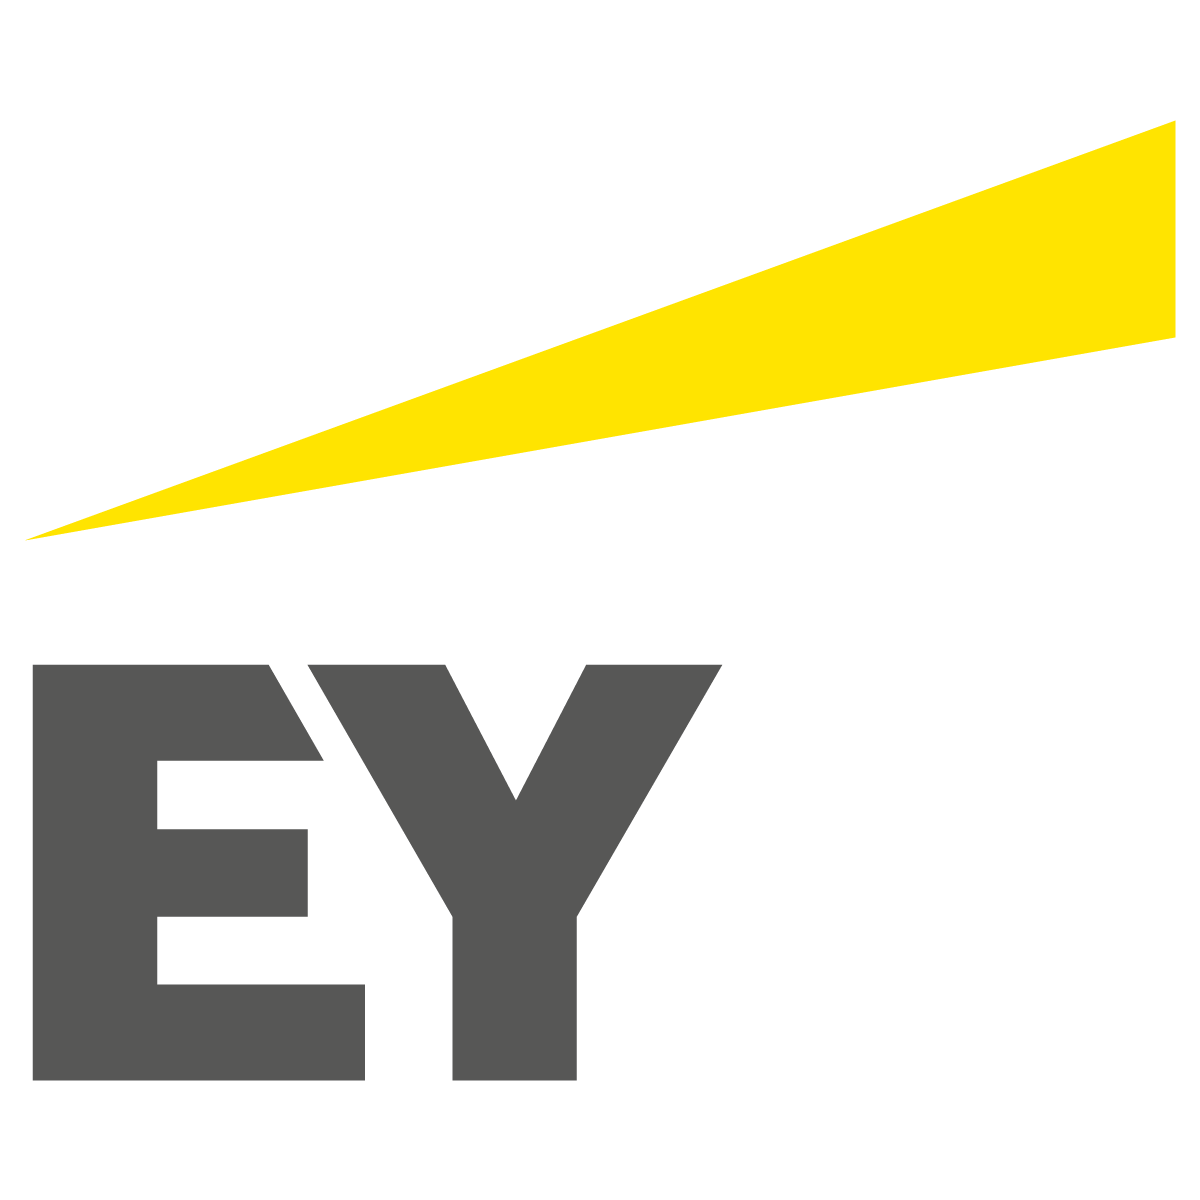 ernst-young-ey-logo-vector.png